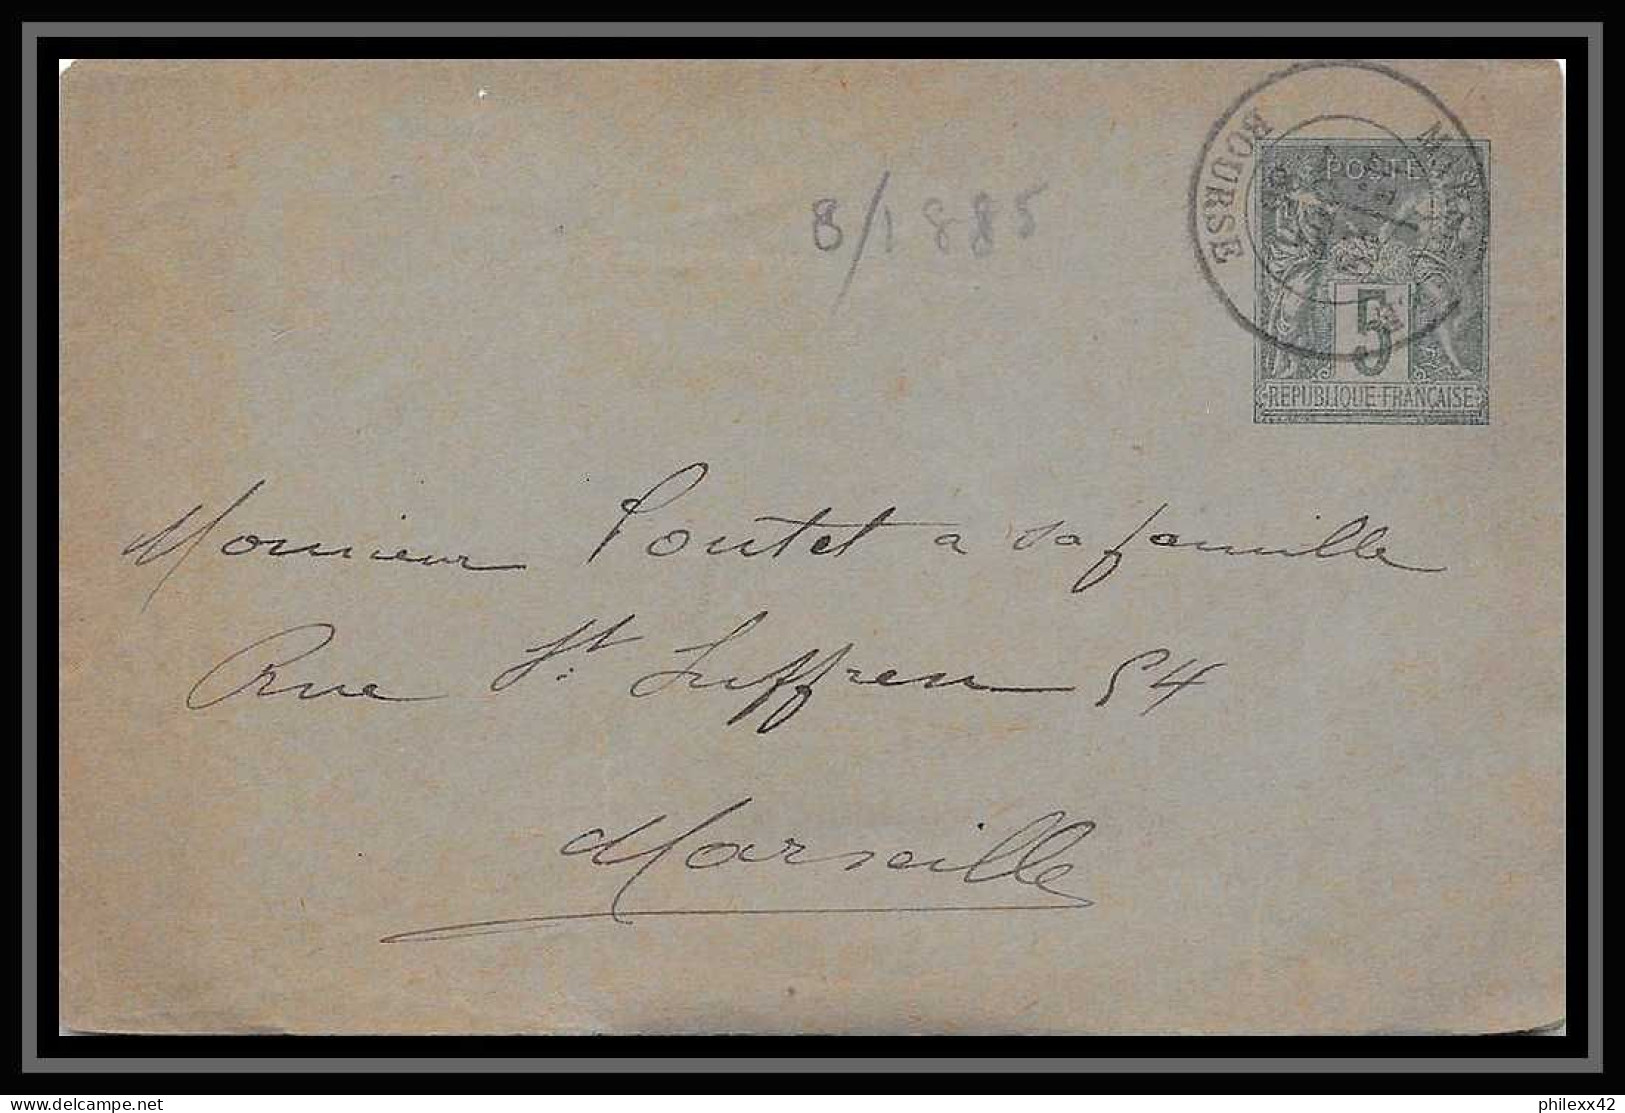 108963 Lsc Enveloppe Cover Entier Postal (Stamped Stationery) Bouches Du Rhone 5c Sage 1885 Marseille Bourse - Standard Covers & Stamped On Demand (before 1995)